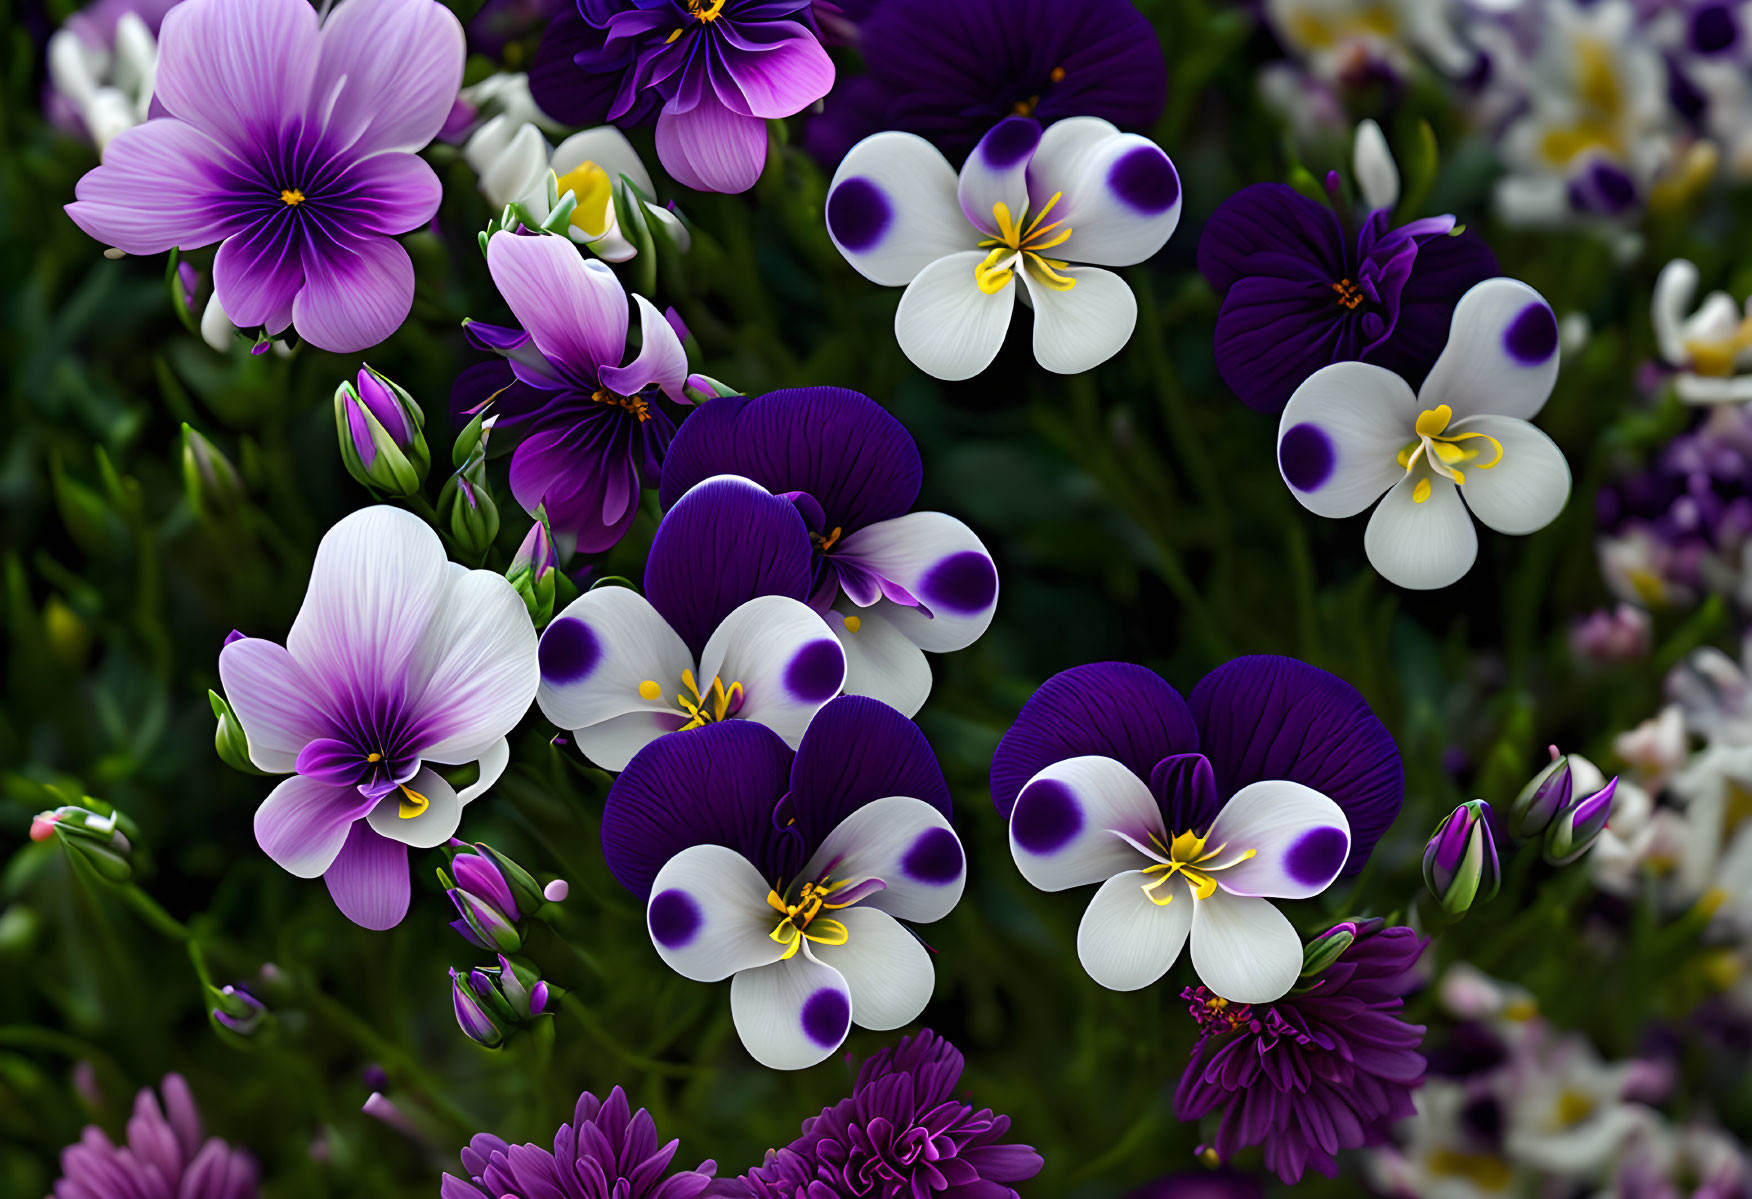 Colorful Pansies in Purple, White, and Yellow Amid Green Foliage